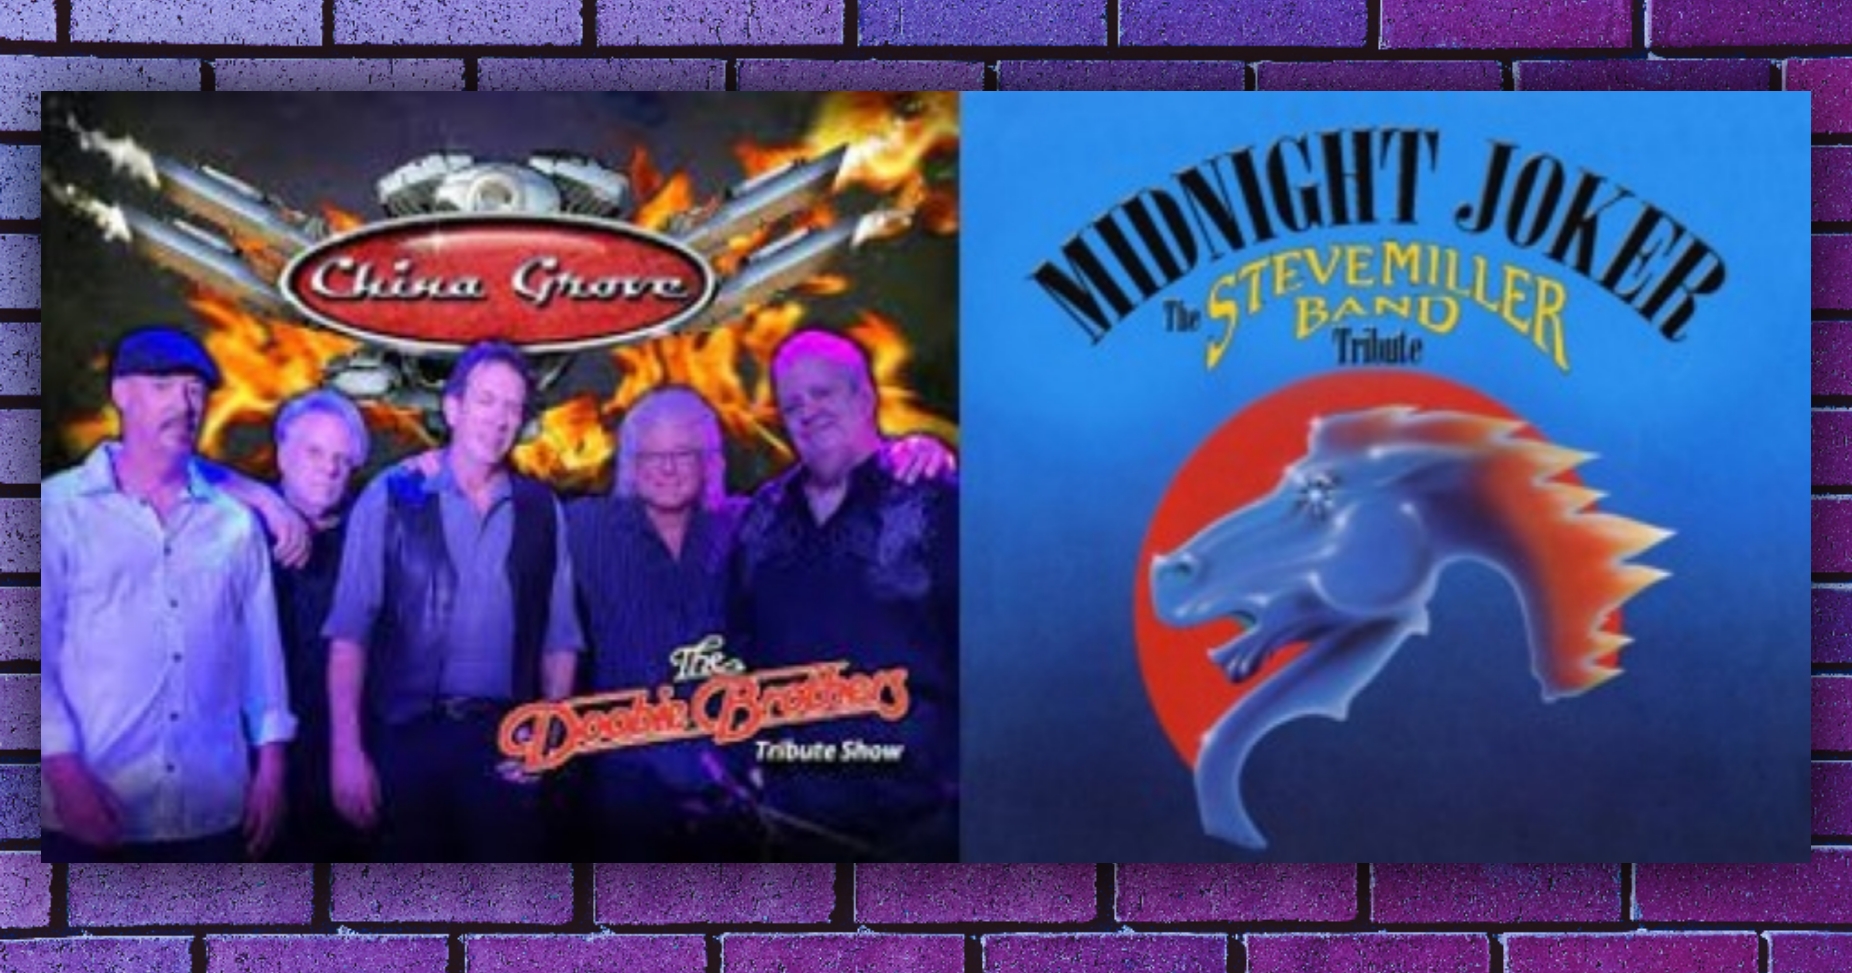 TWO<b> </b>TRIBUTES - ONE AFTERNOON!: Midnight Joker (Tribute to The Steve Miller Band) AND China Grove (Tribute to The Doobie Brothers) !!